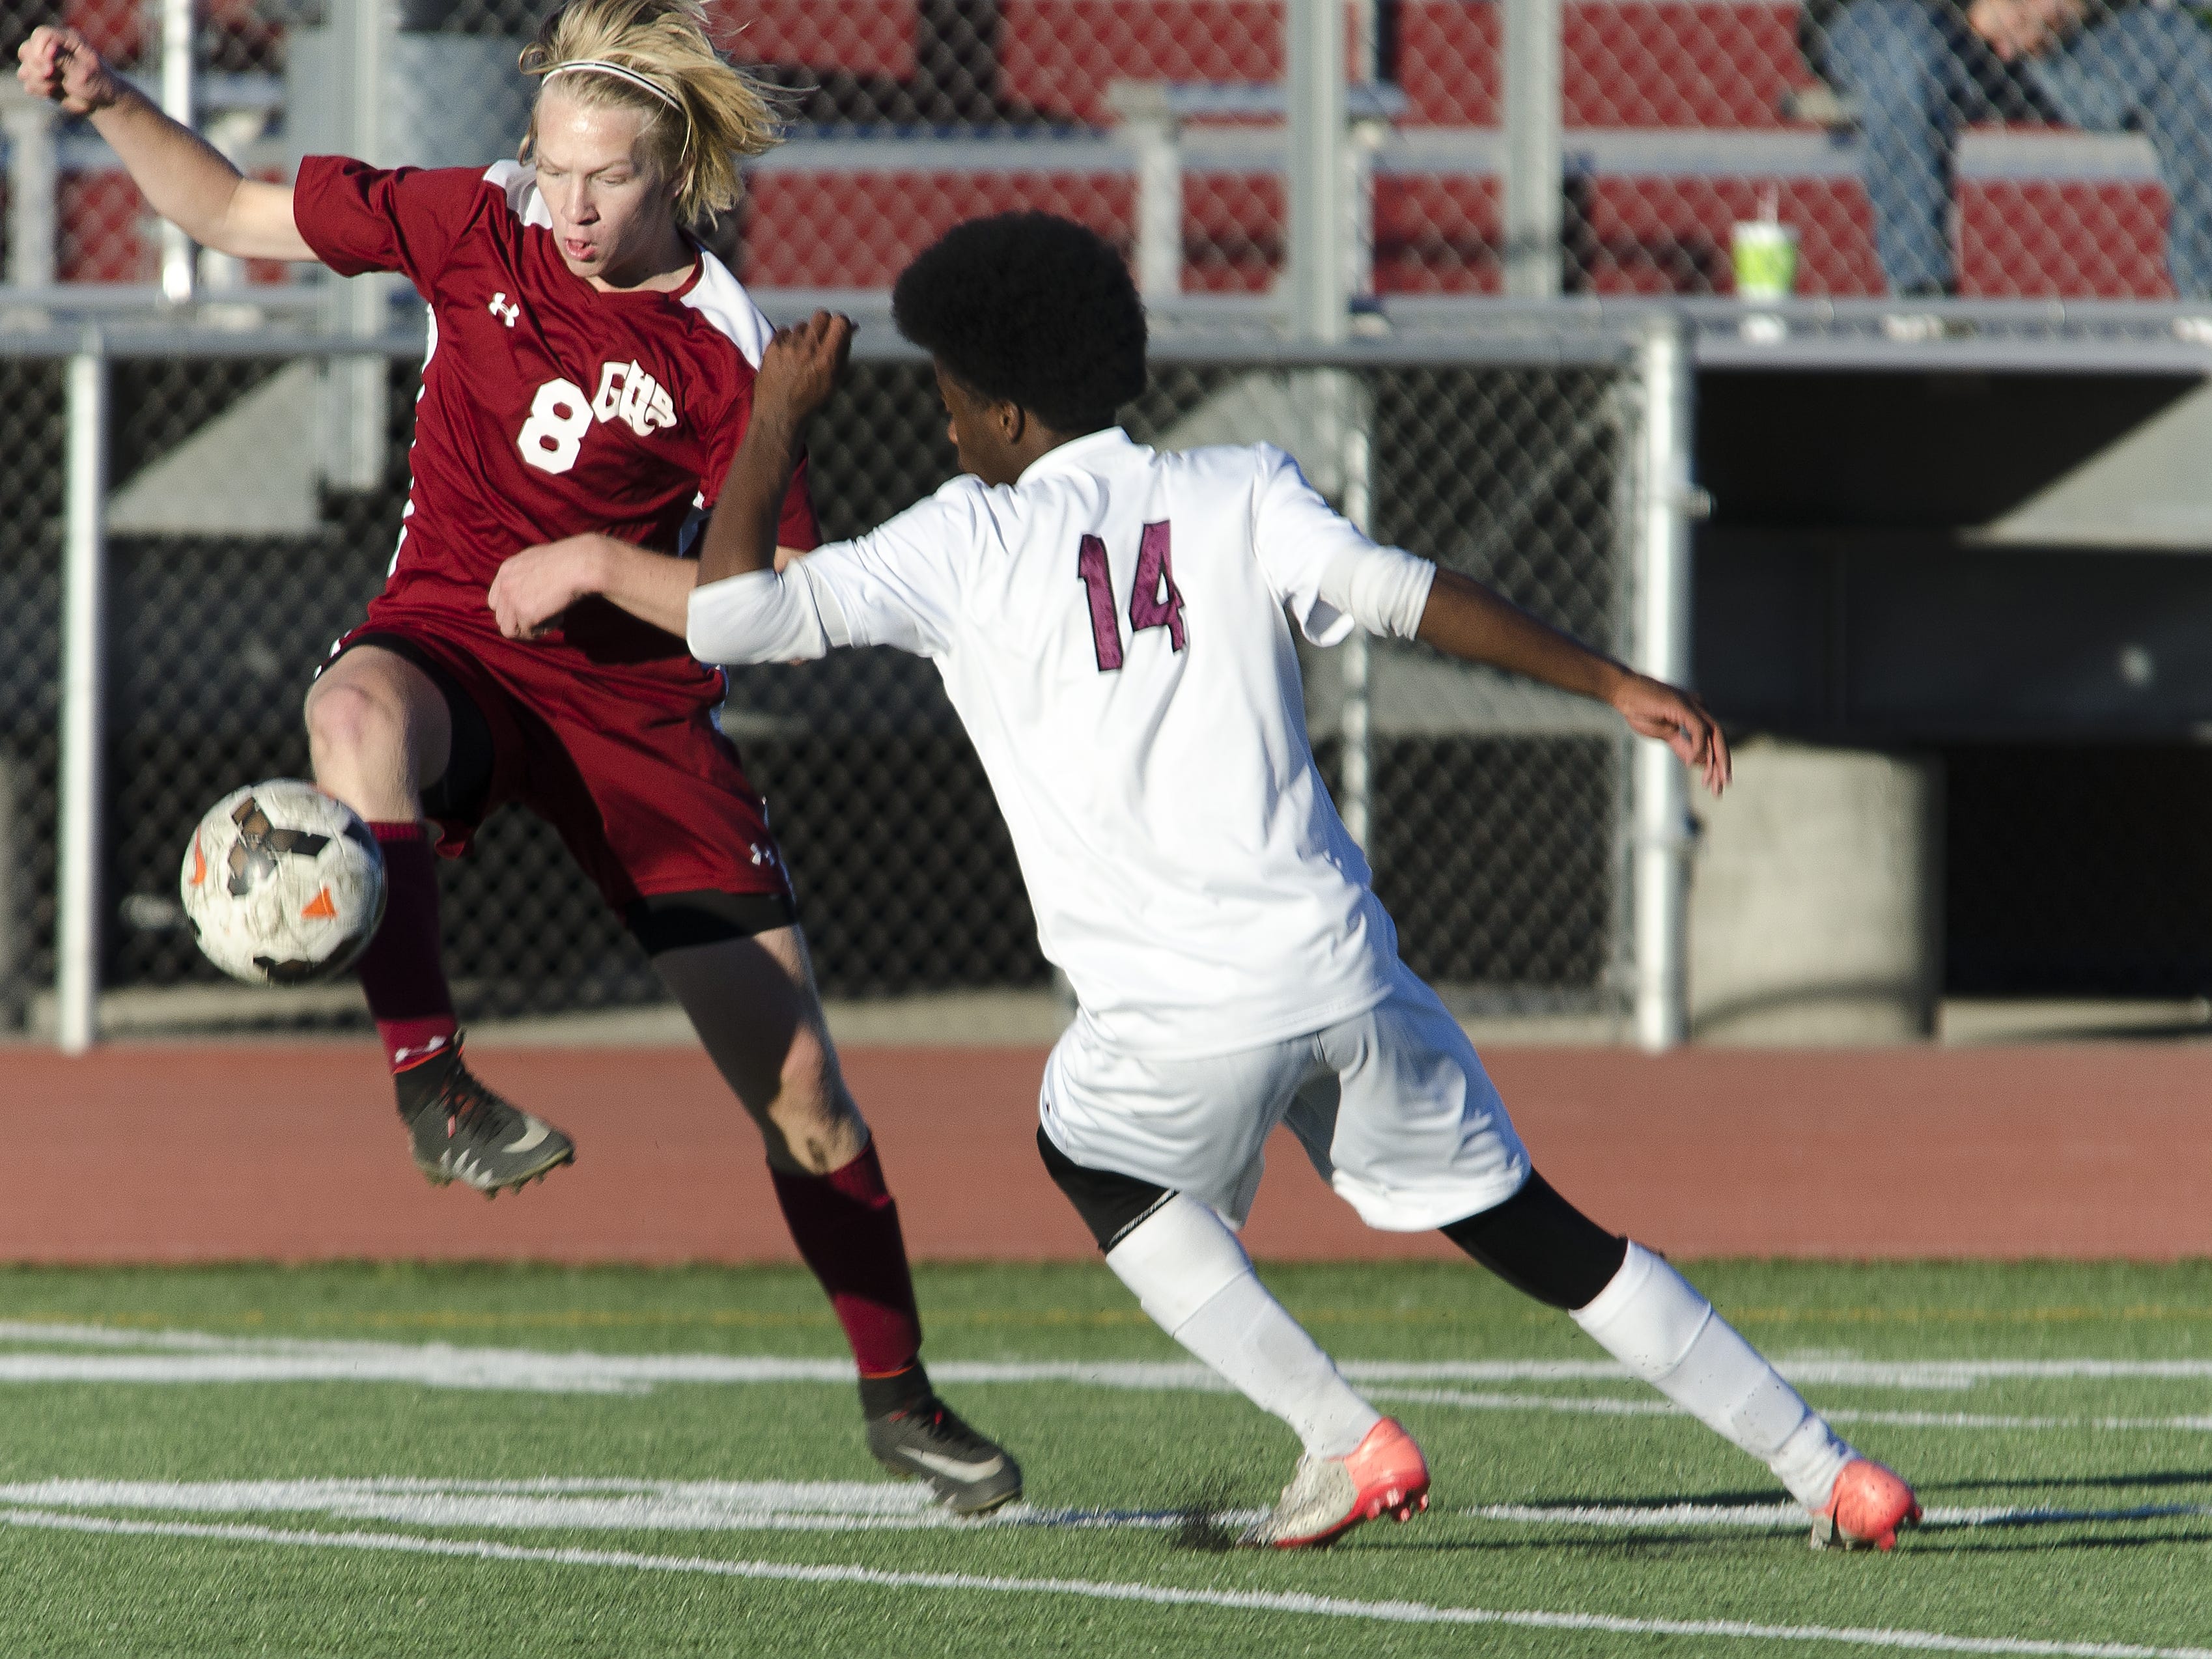 Area Roundup 12-9-16: Pinkerton's late goal earns Cougars tie